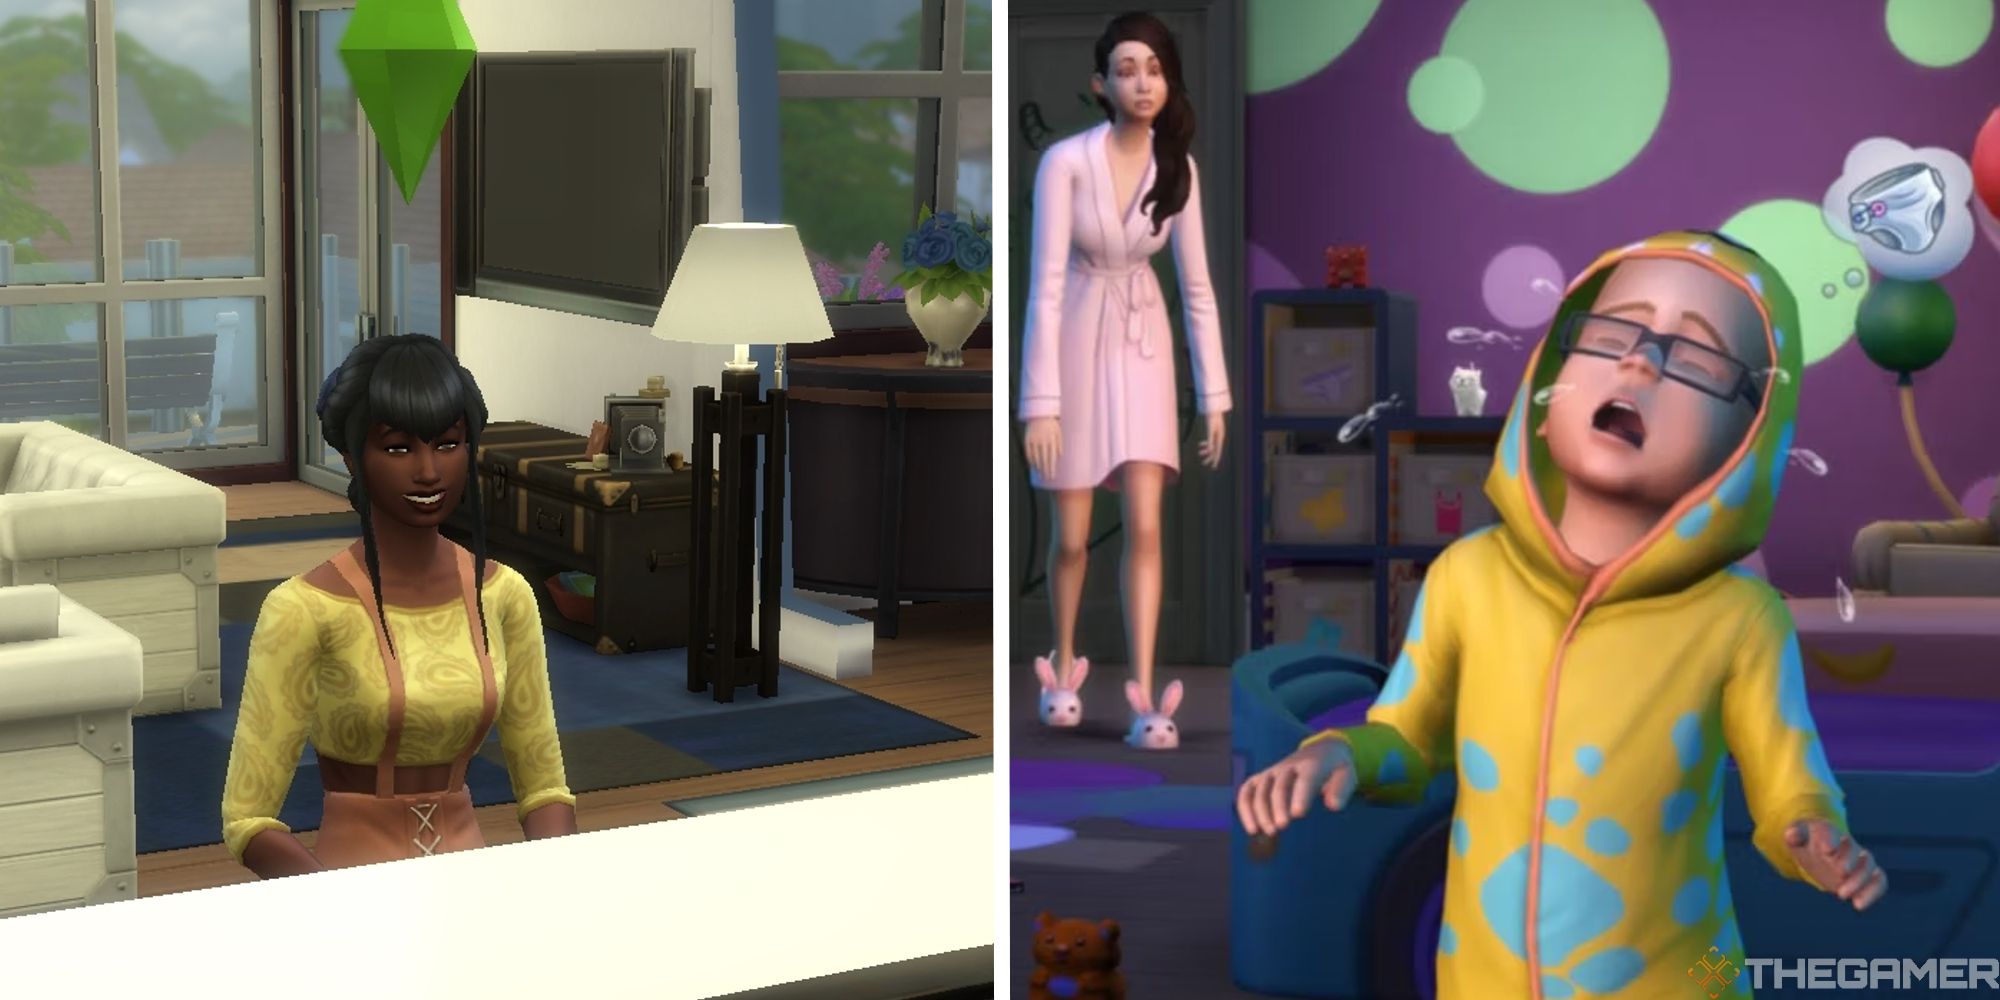 sims 4 split image showing sim sitting at counter while smiling next to image of toddler crying in room with adult in background